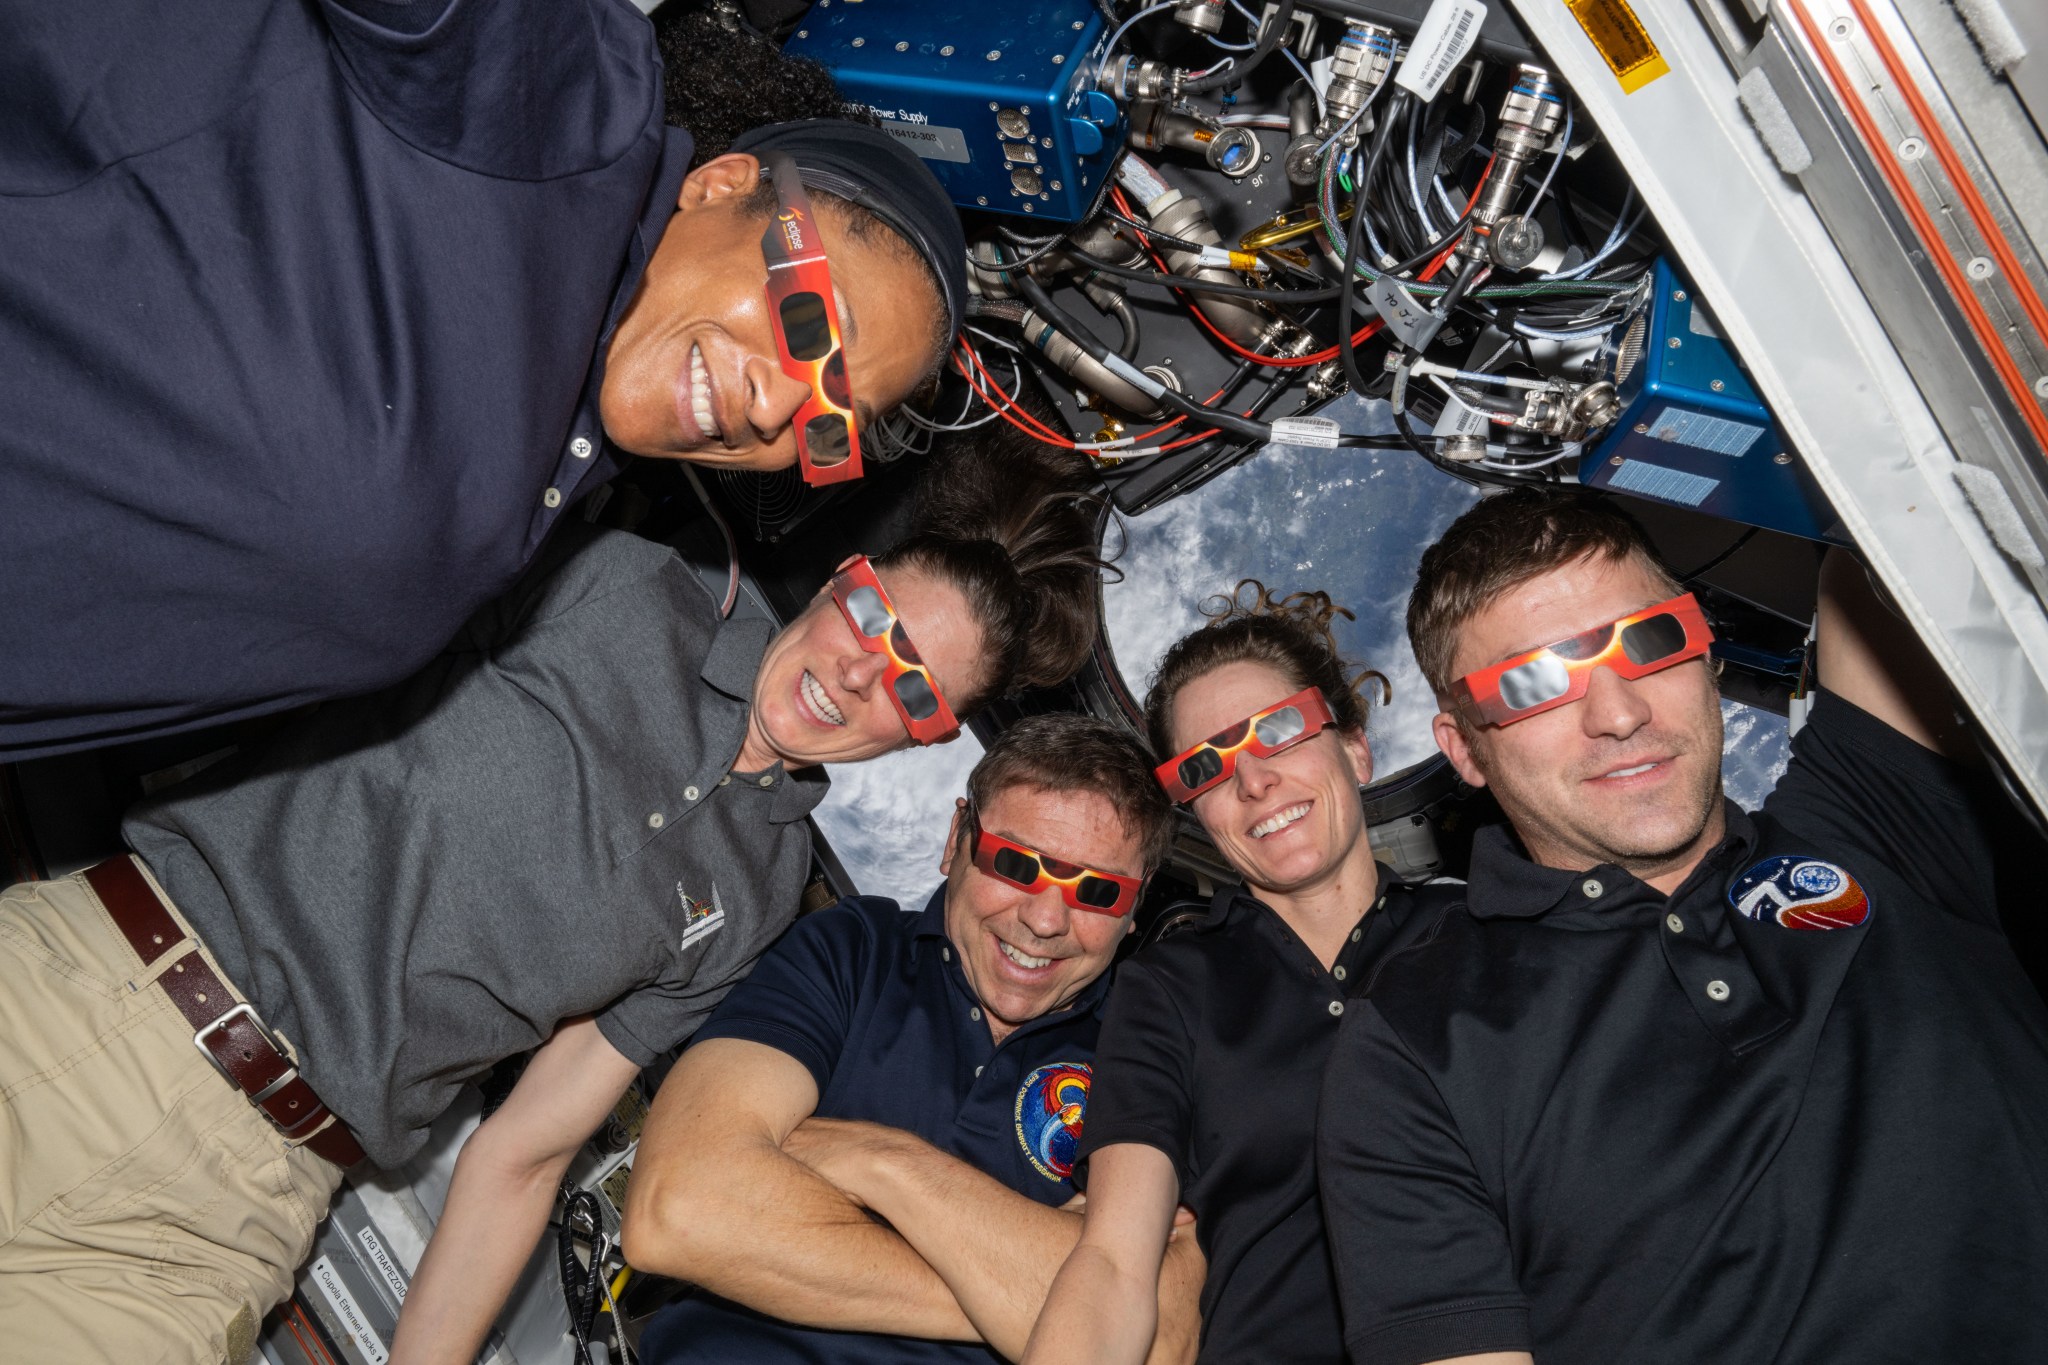 Five NASA astronauts, three women and two men, pose for a photo together while wearing eclipse glasses. The eclipse glasses are rectangular and have two dark lenses.